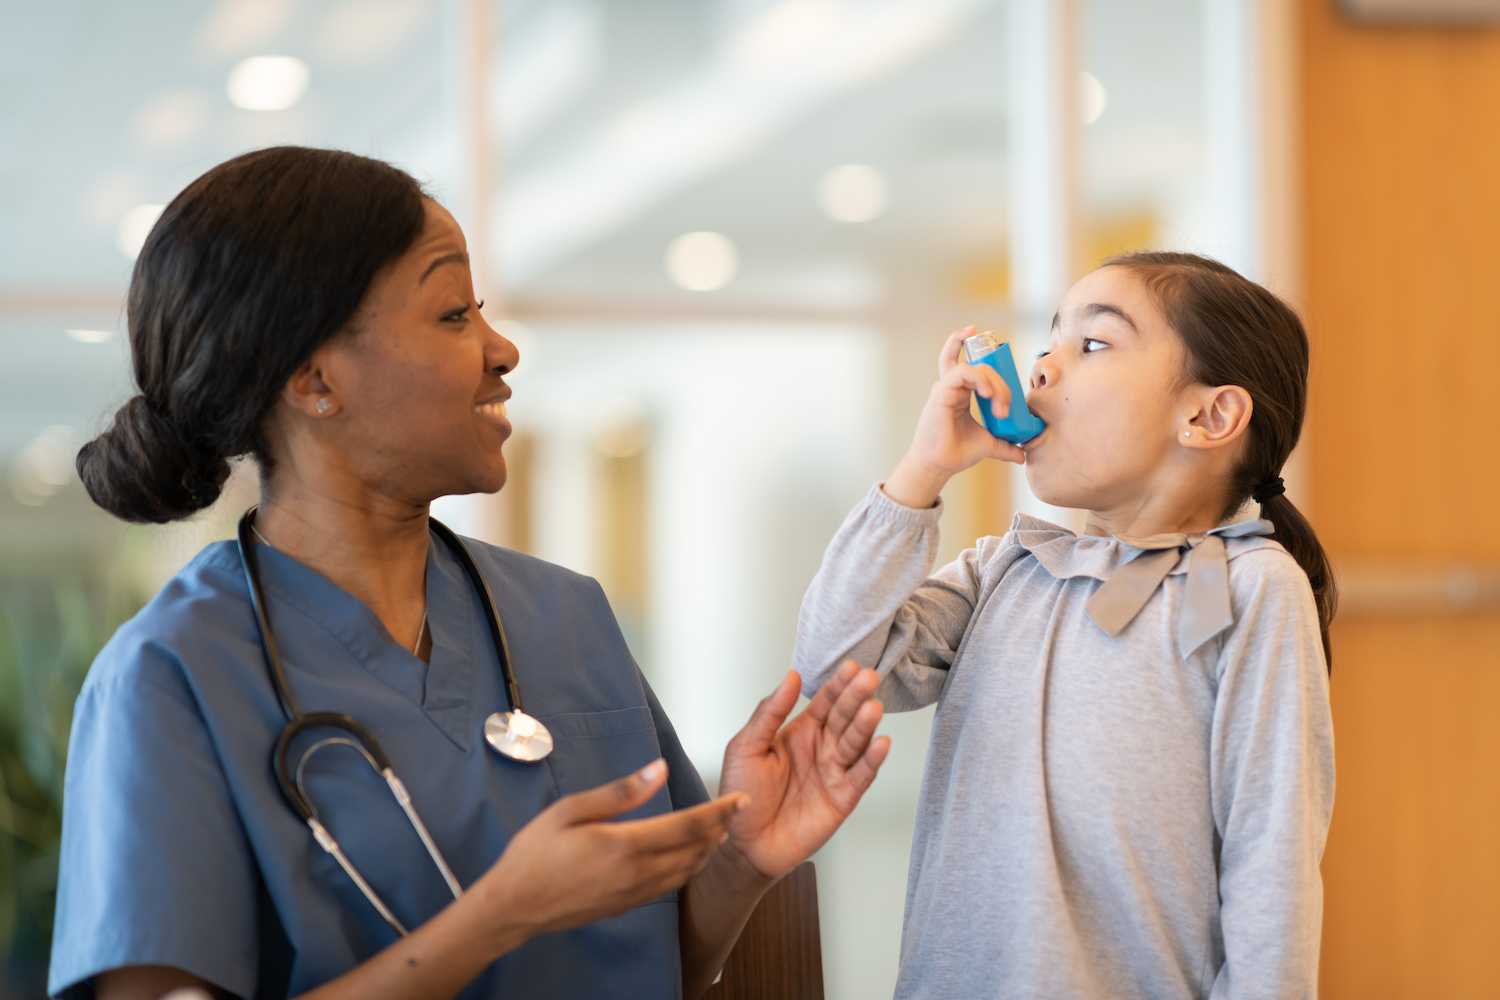 A Quality Improvement Intervention to Improve Inpatient Pediatric Asthma Controller Accuracy